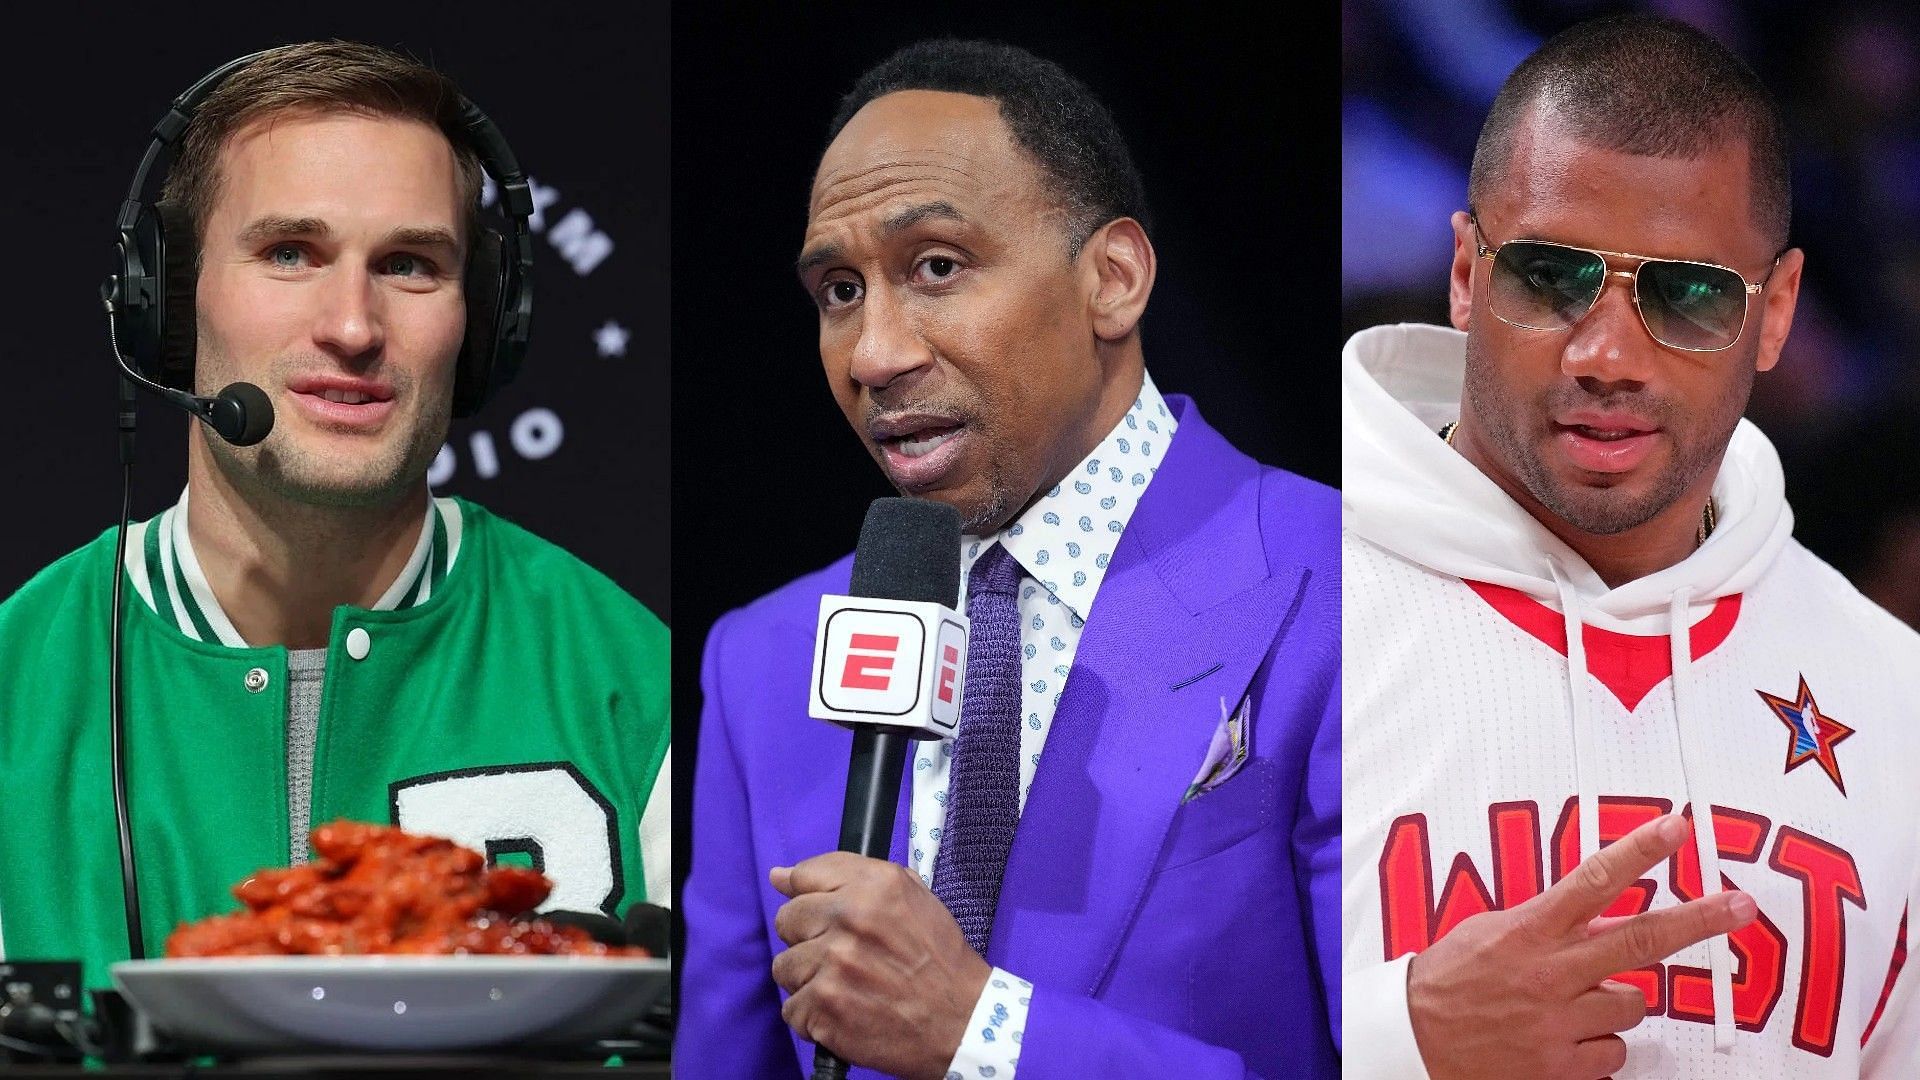 Stephen A. Smith compares Falcons&rsquo; new QB situation with Kirk Cousins to one that fostered Russell Wilson&rsquo;s rise